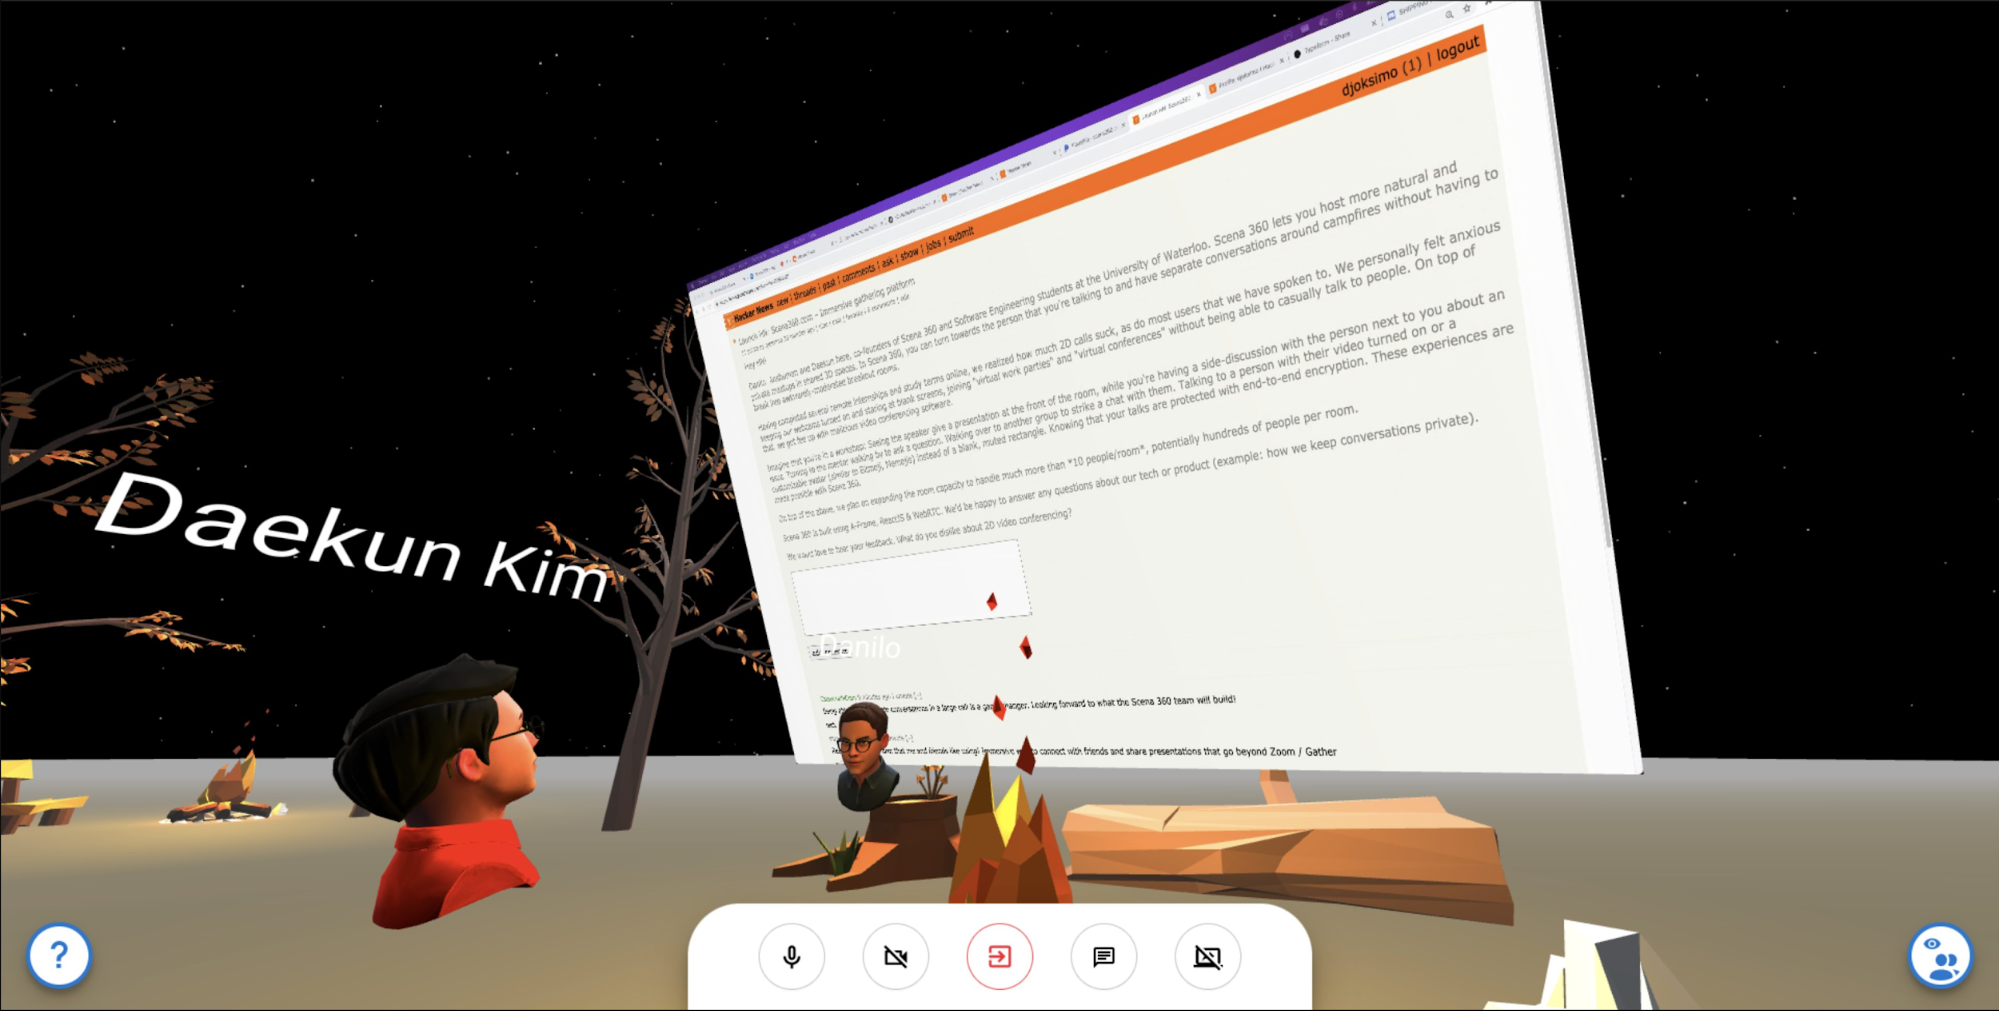 Scena360 virtual reality meetup software with 3d avatars from readyplayerme